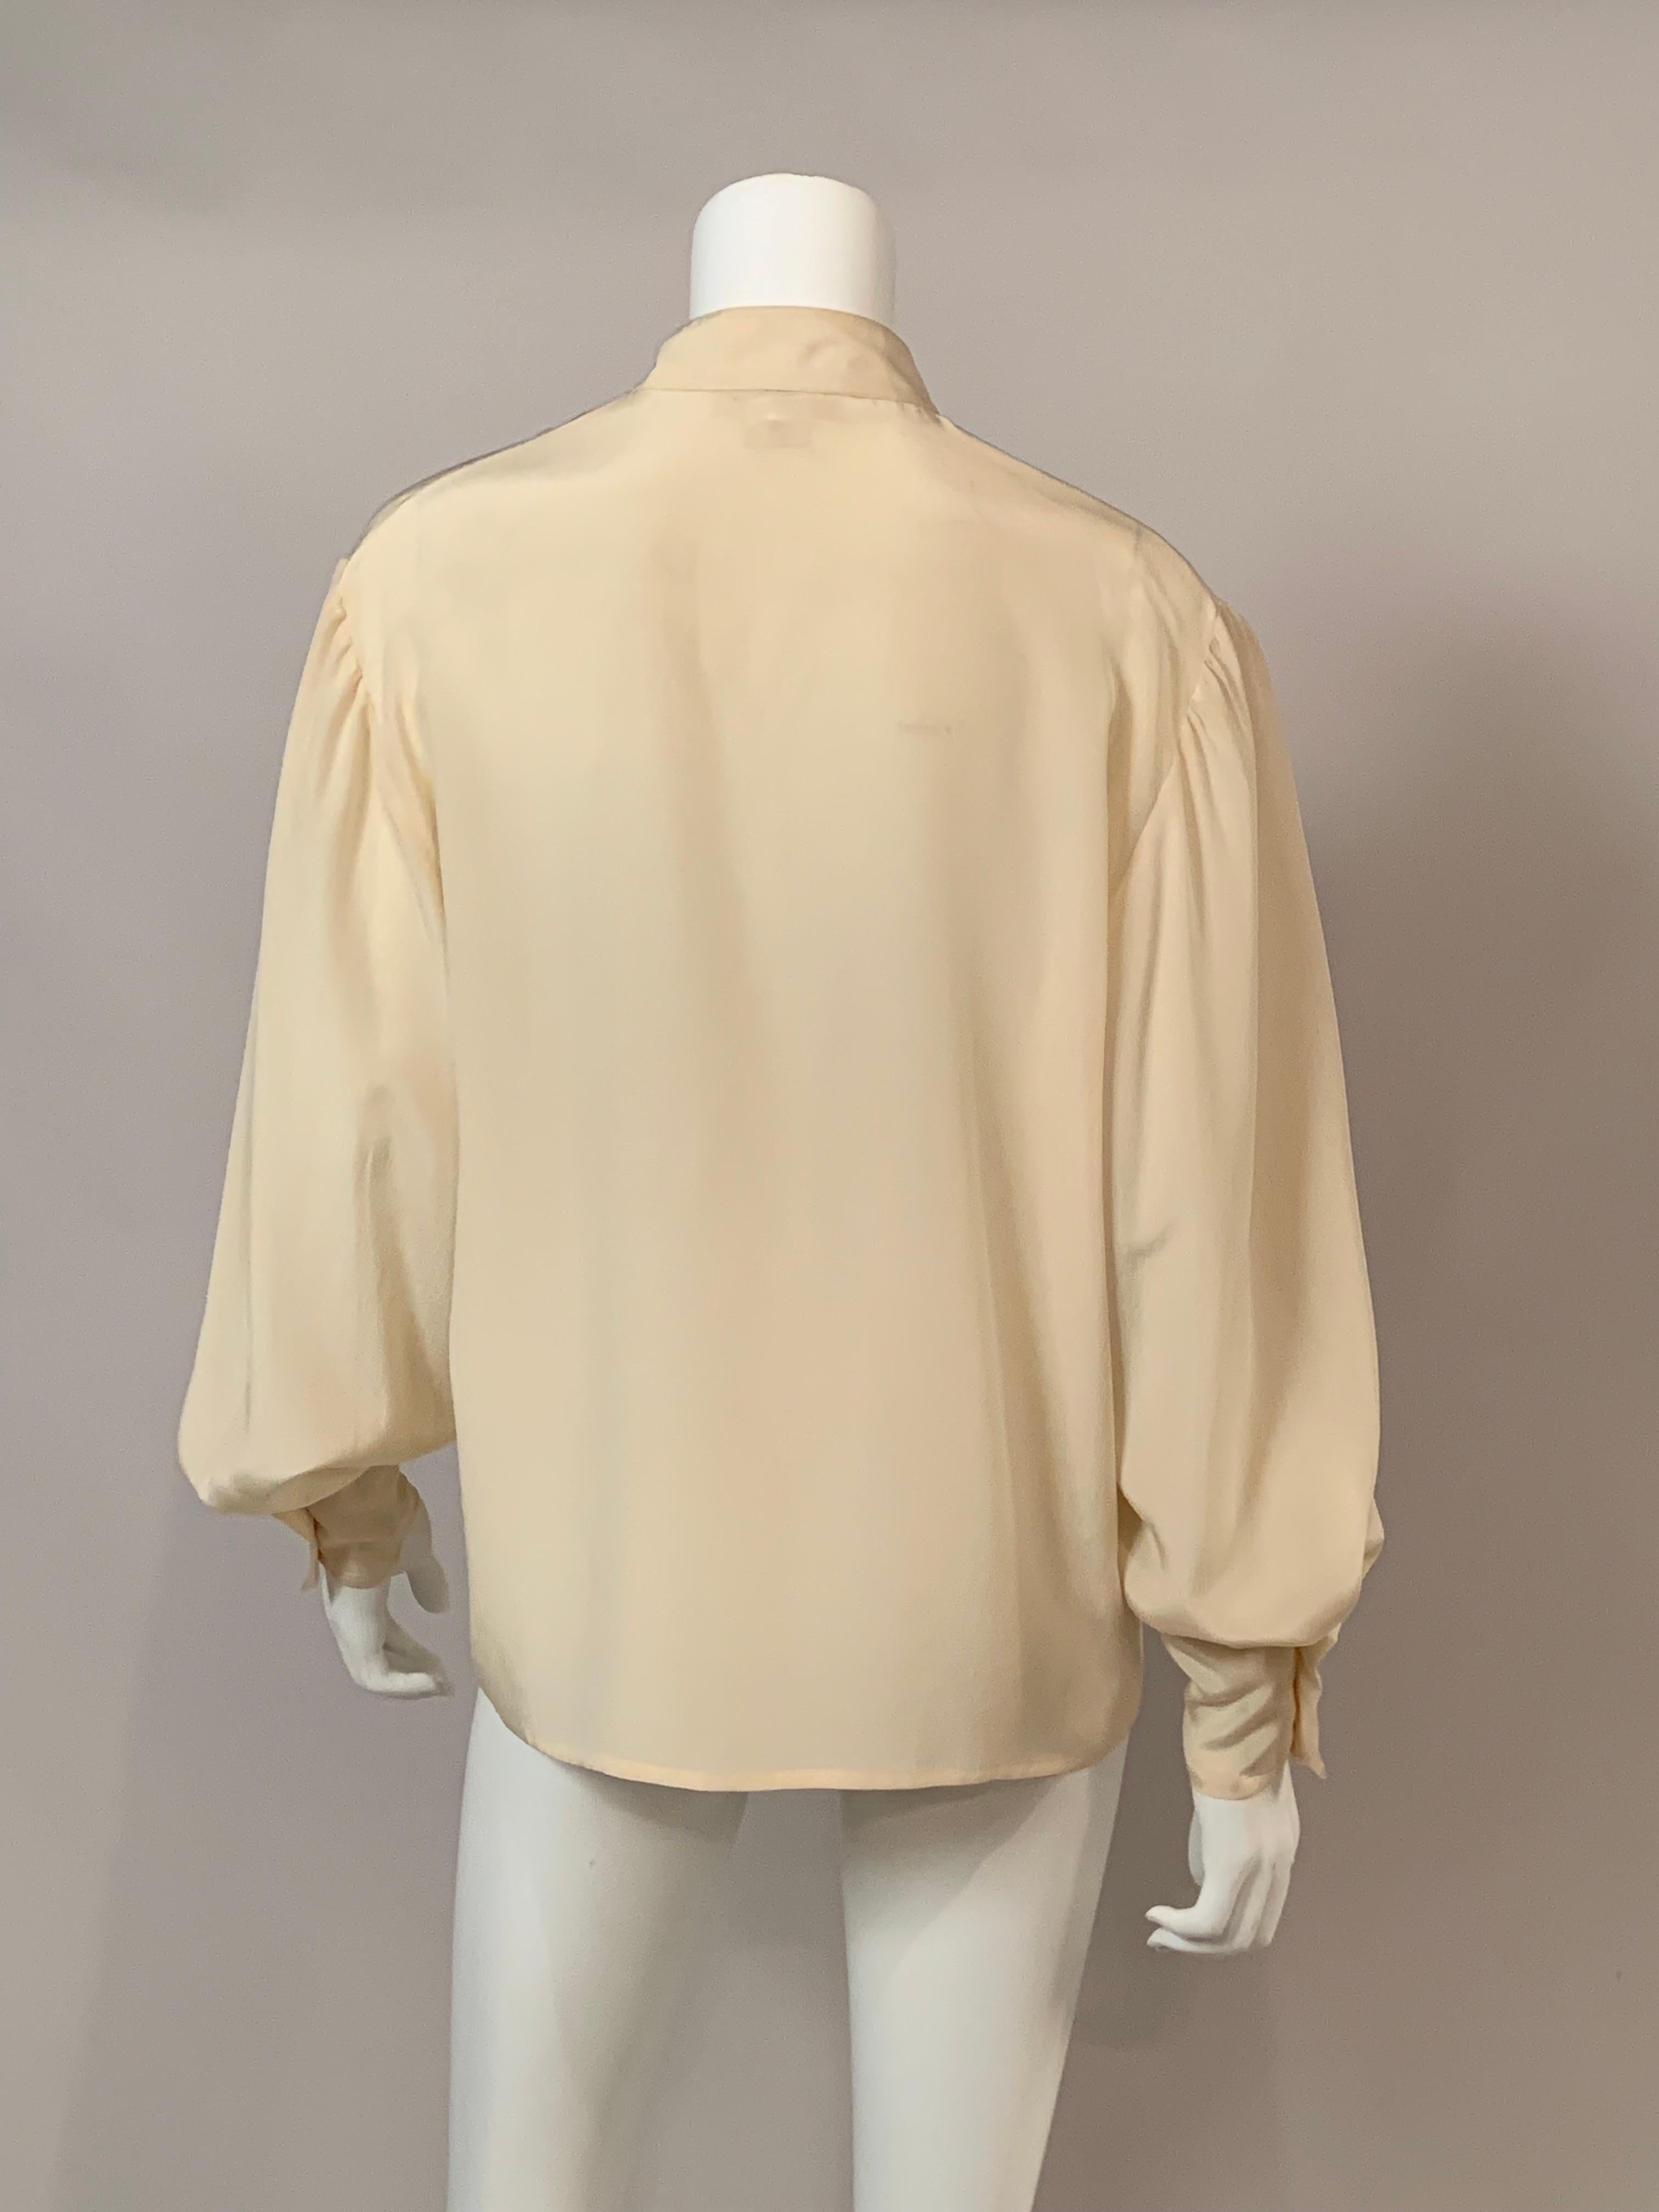 Ferragamo Ivory Silk One Button Blouse  Larger Size For Sale 2